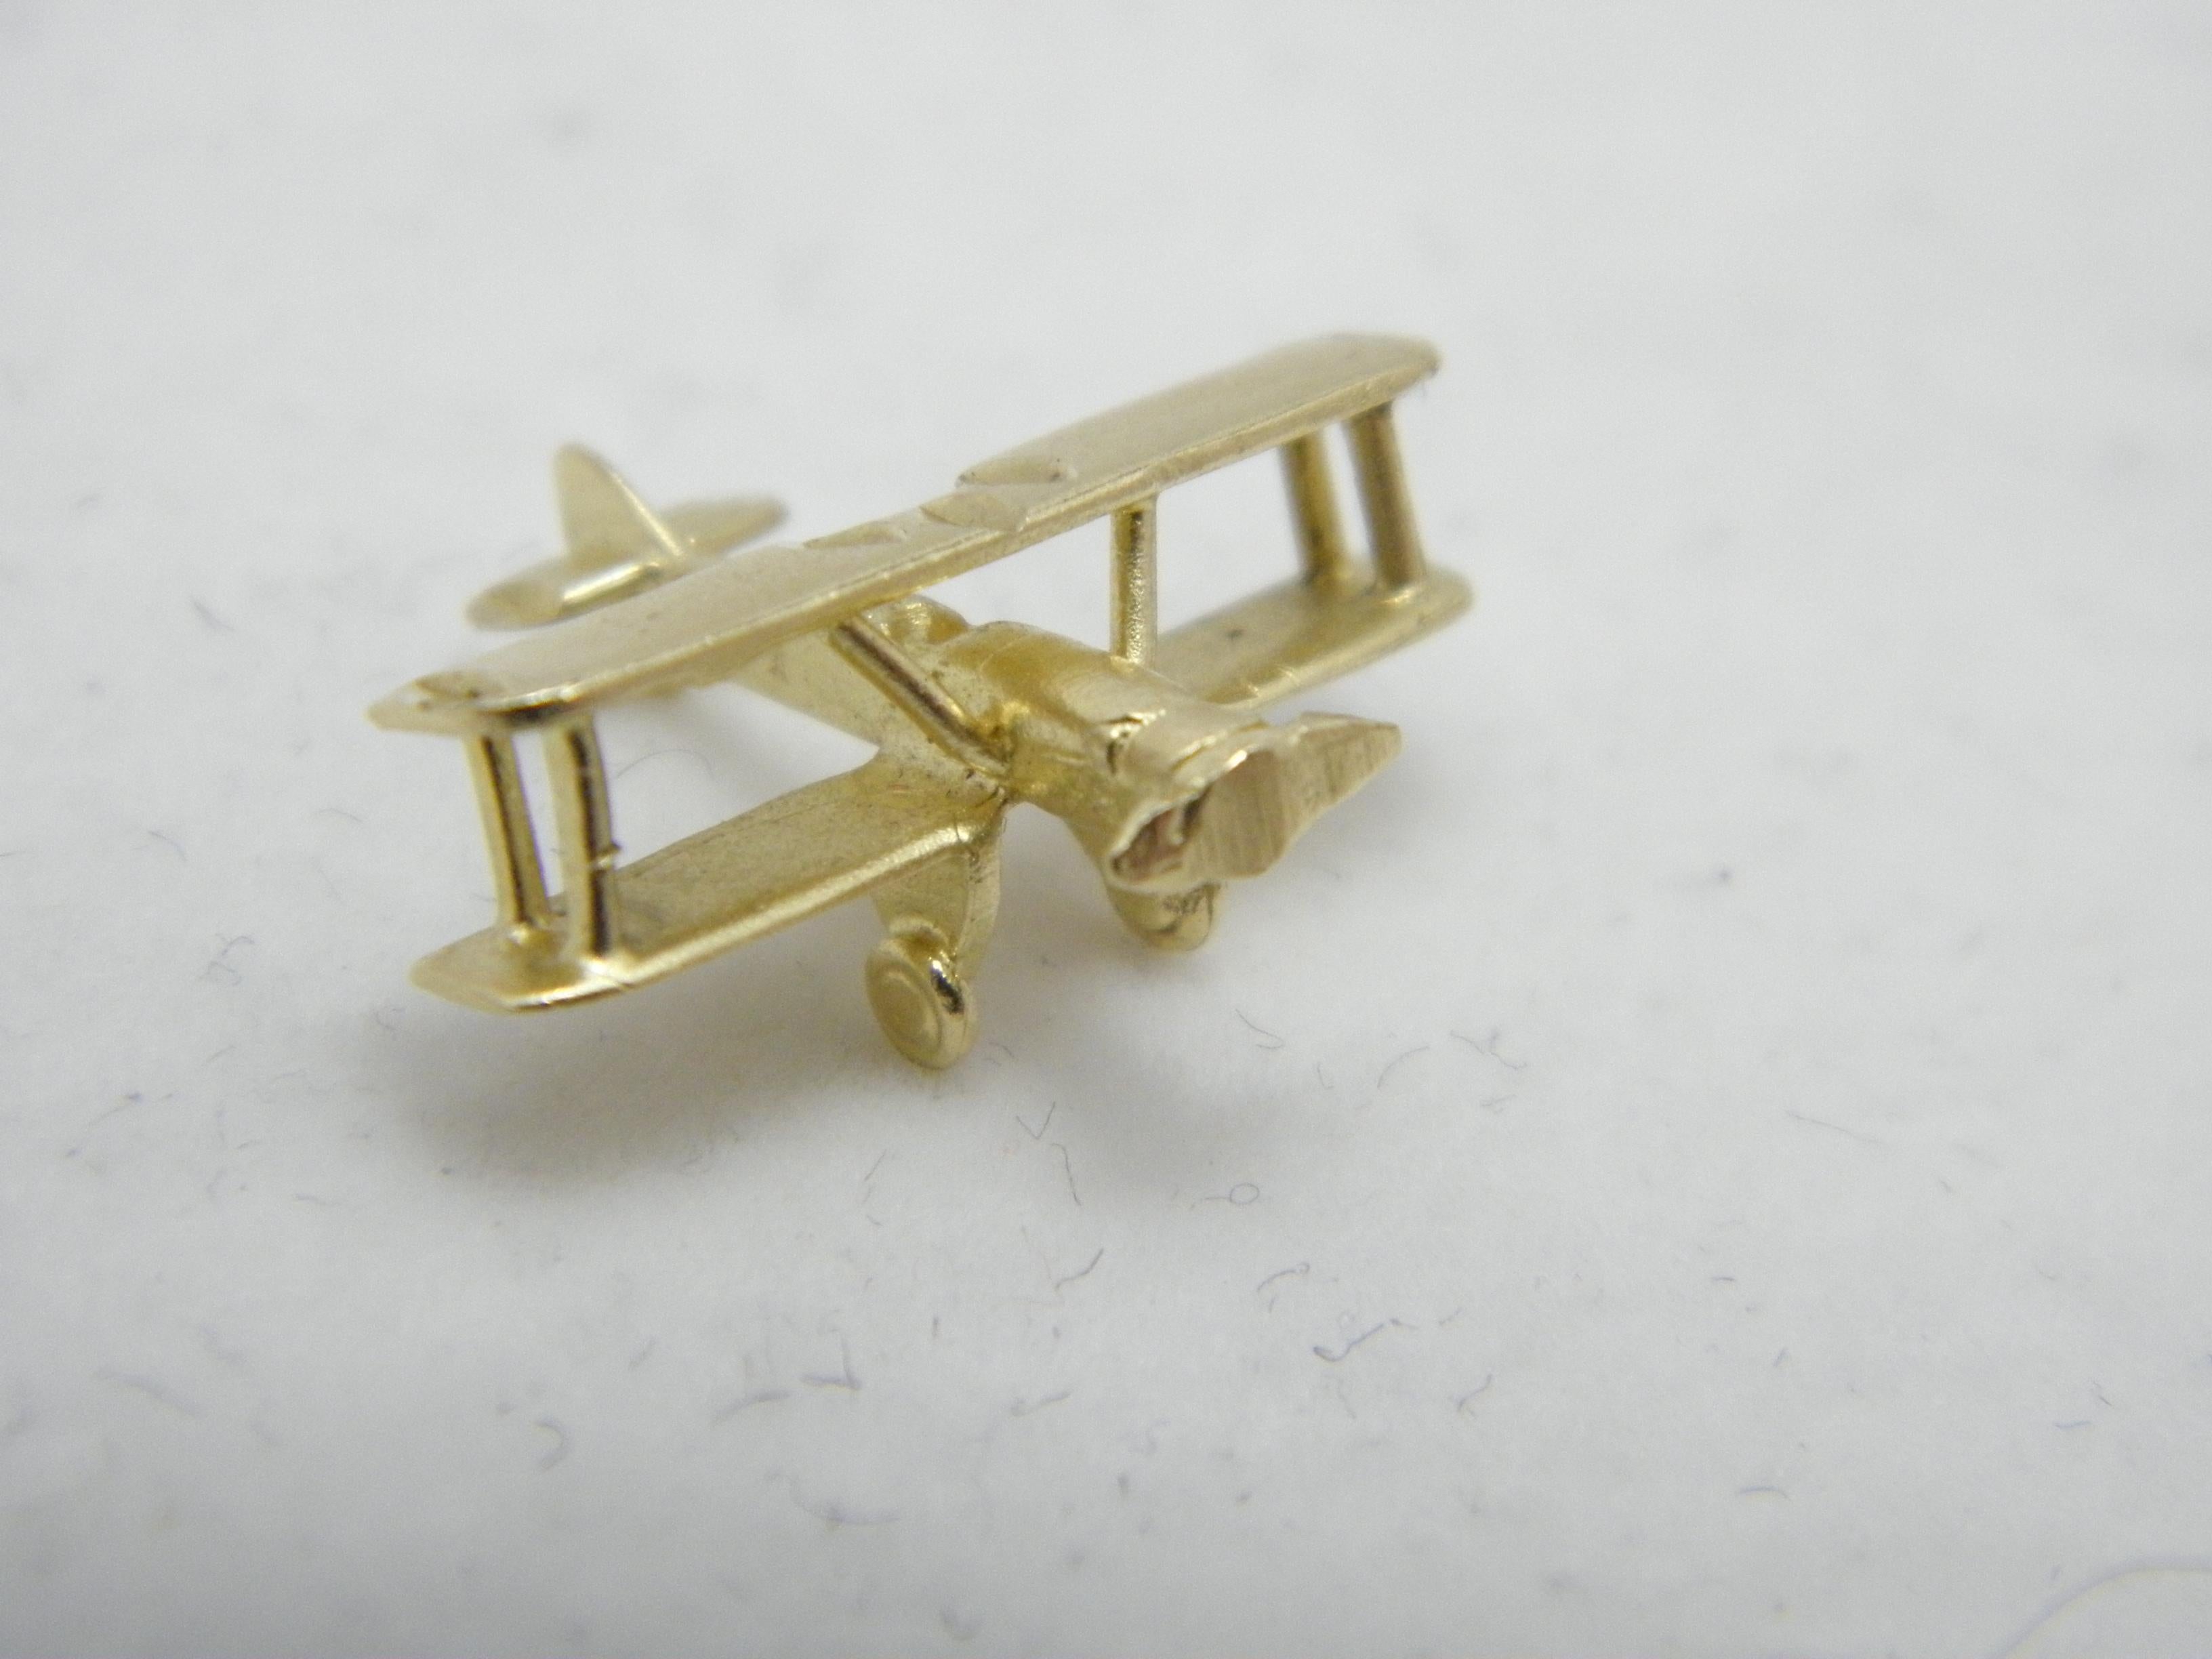 Vintage 14ct Gold Biplane Aeroplane Model Charm Fob c1970s 585 Purity Heavy In Excellent Condition For Sale In Camelford, GB